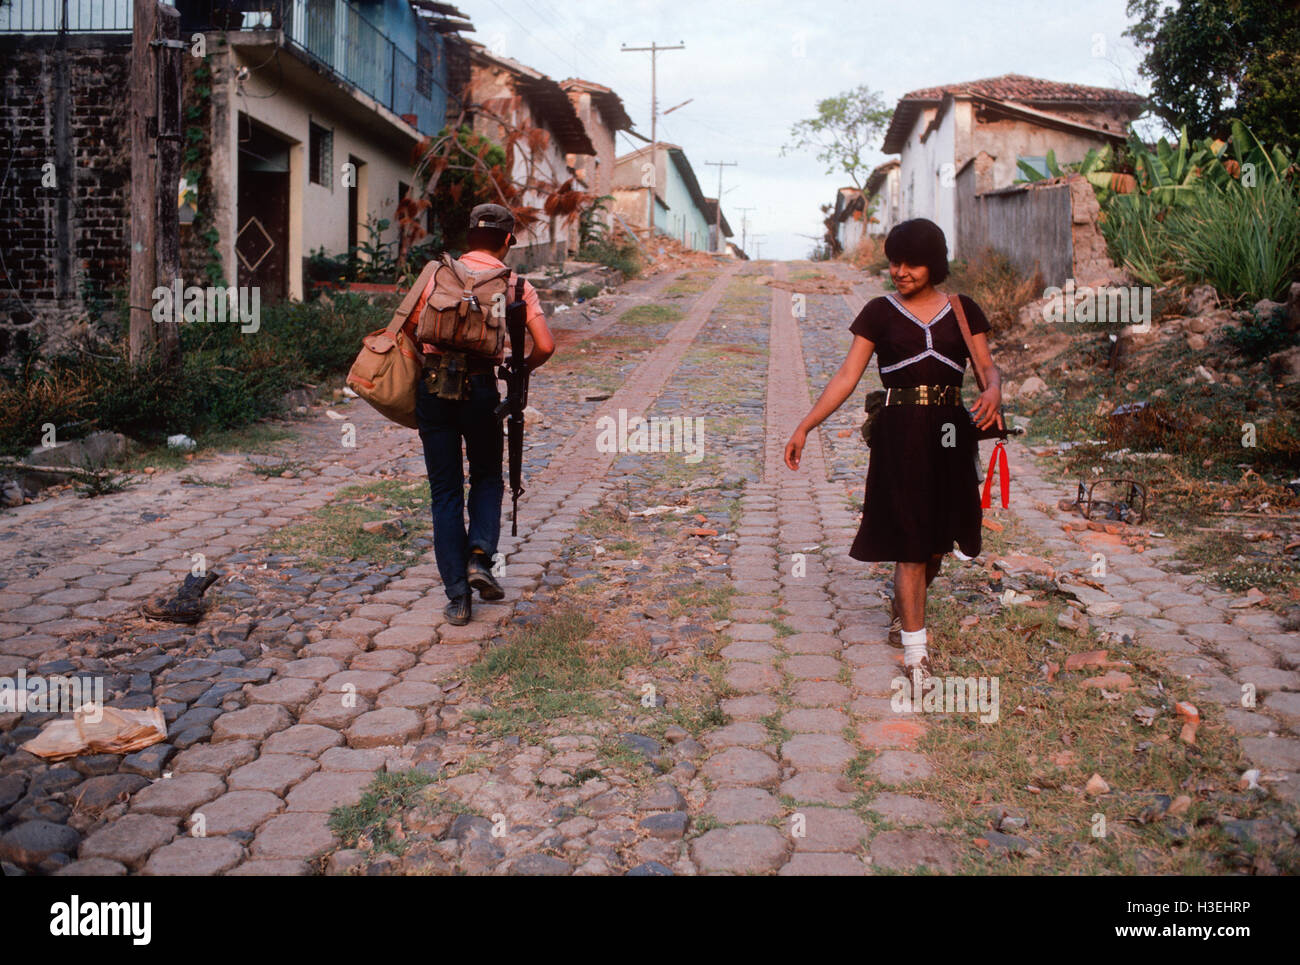 TENANCINGO,  EL SALVADOR, MARCH 1984: - Within the FPL Guerrilla's Zones of Control.  A teenage woman guerrilla fighter smiles at a friend as she passes him in the ruined street of Tenancingo. Stock Photo